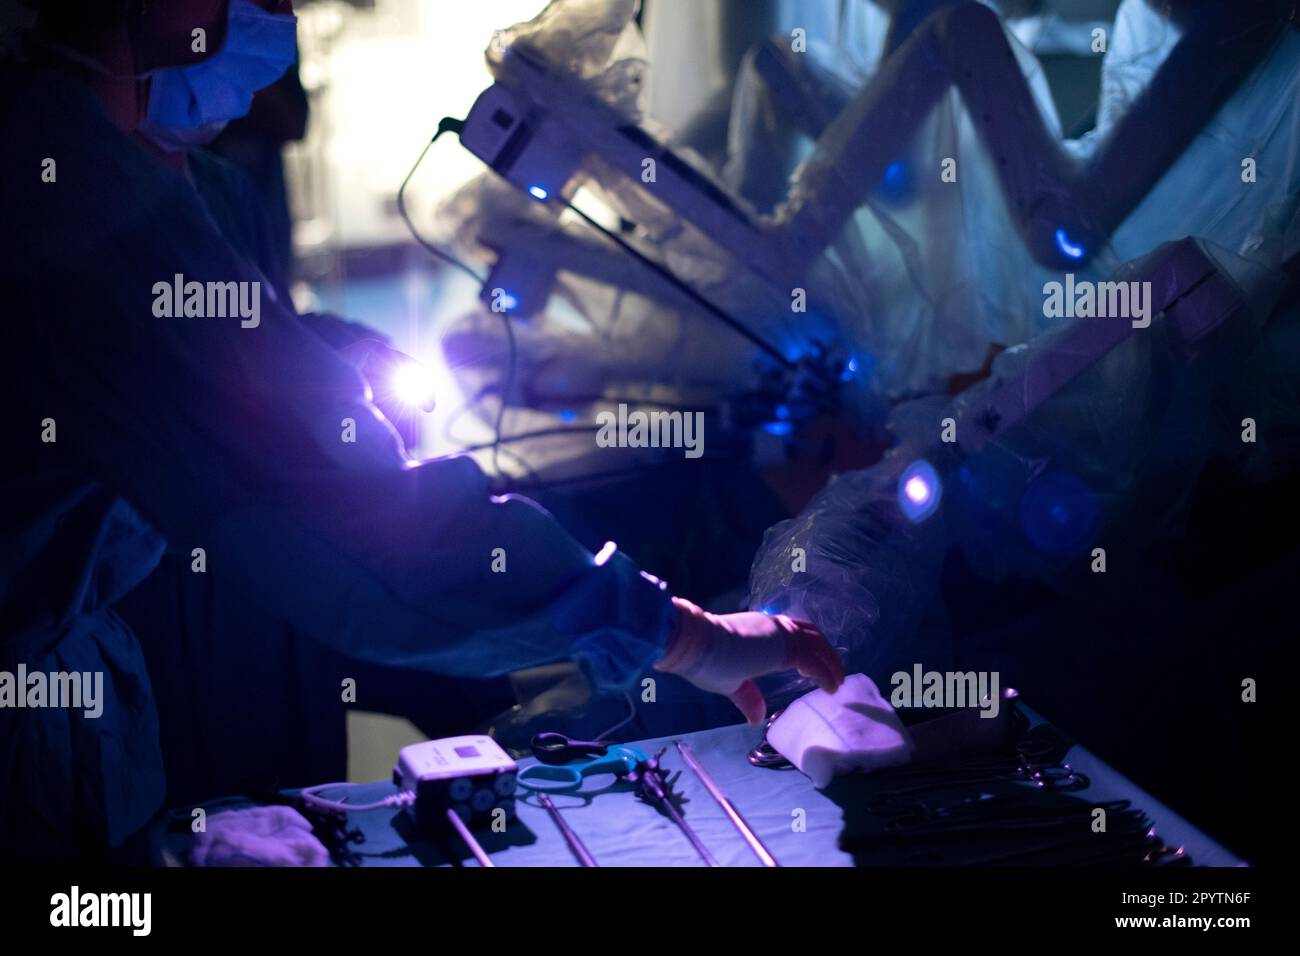 Doctor assists during a modern hybrid surgery, 3D innovative technology with the DaVinci system a robot-assisted surgery KI robotics. Operation of a tumor on the liver and stomach in the University Hospital Carl Gustav Carus, Clinic and Polyclinic for Visceral Surgery, Thoracic Surgery and Vascular Surgery and Center for Tumor Diseases in Dresden, Saxony, Germany. Robot-assisted surgery is a modern surgical procedure in medicine. It enables the surgeon to carry out minimally invasive surgical techniques with the support of the robot-assisted system. Stock Photo